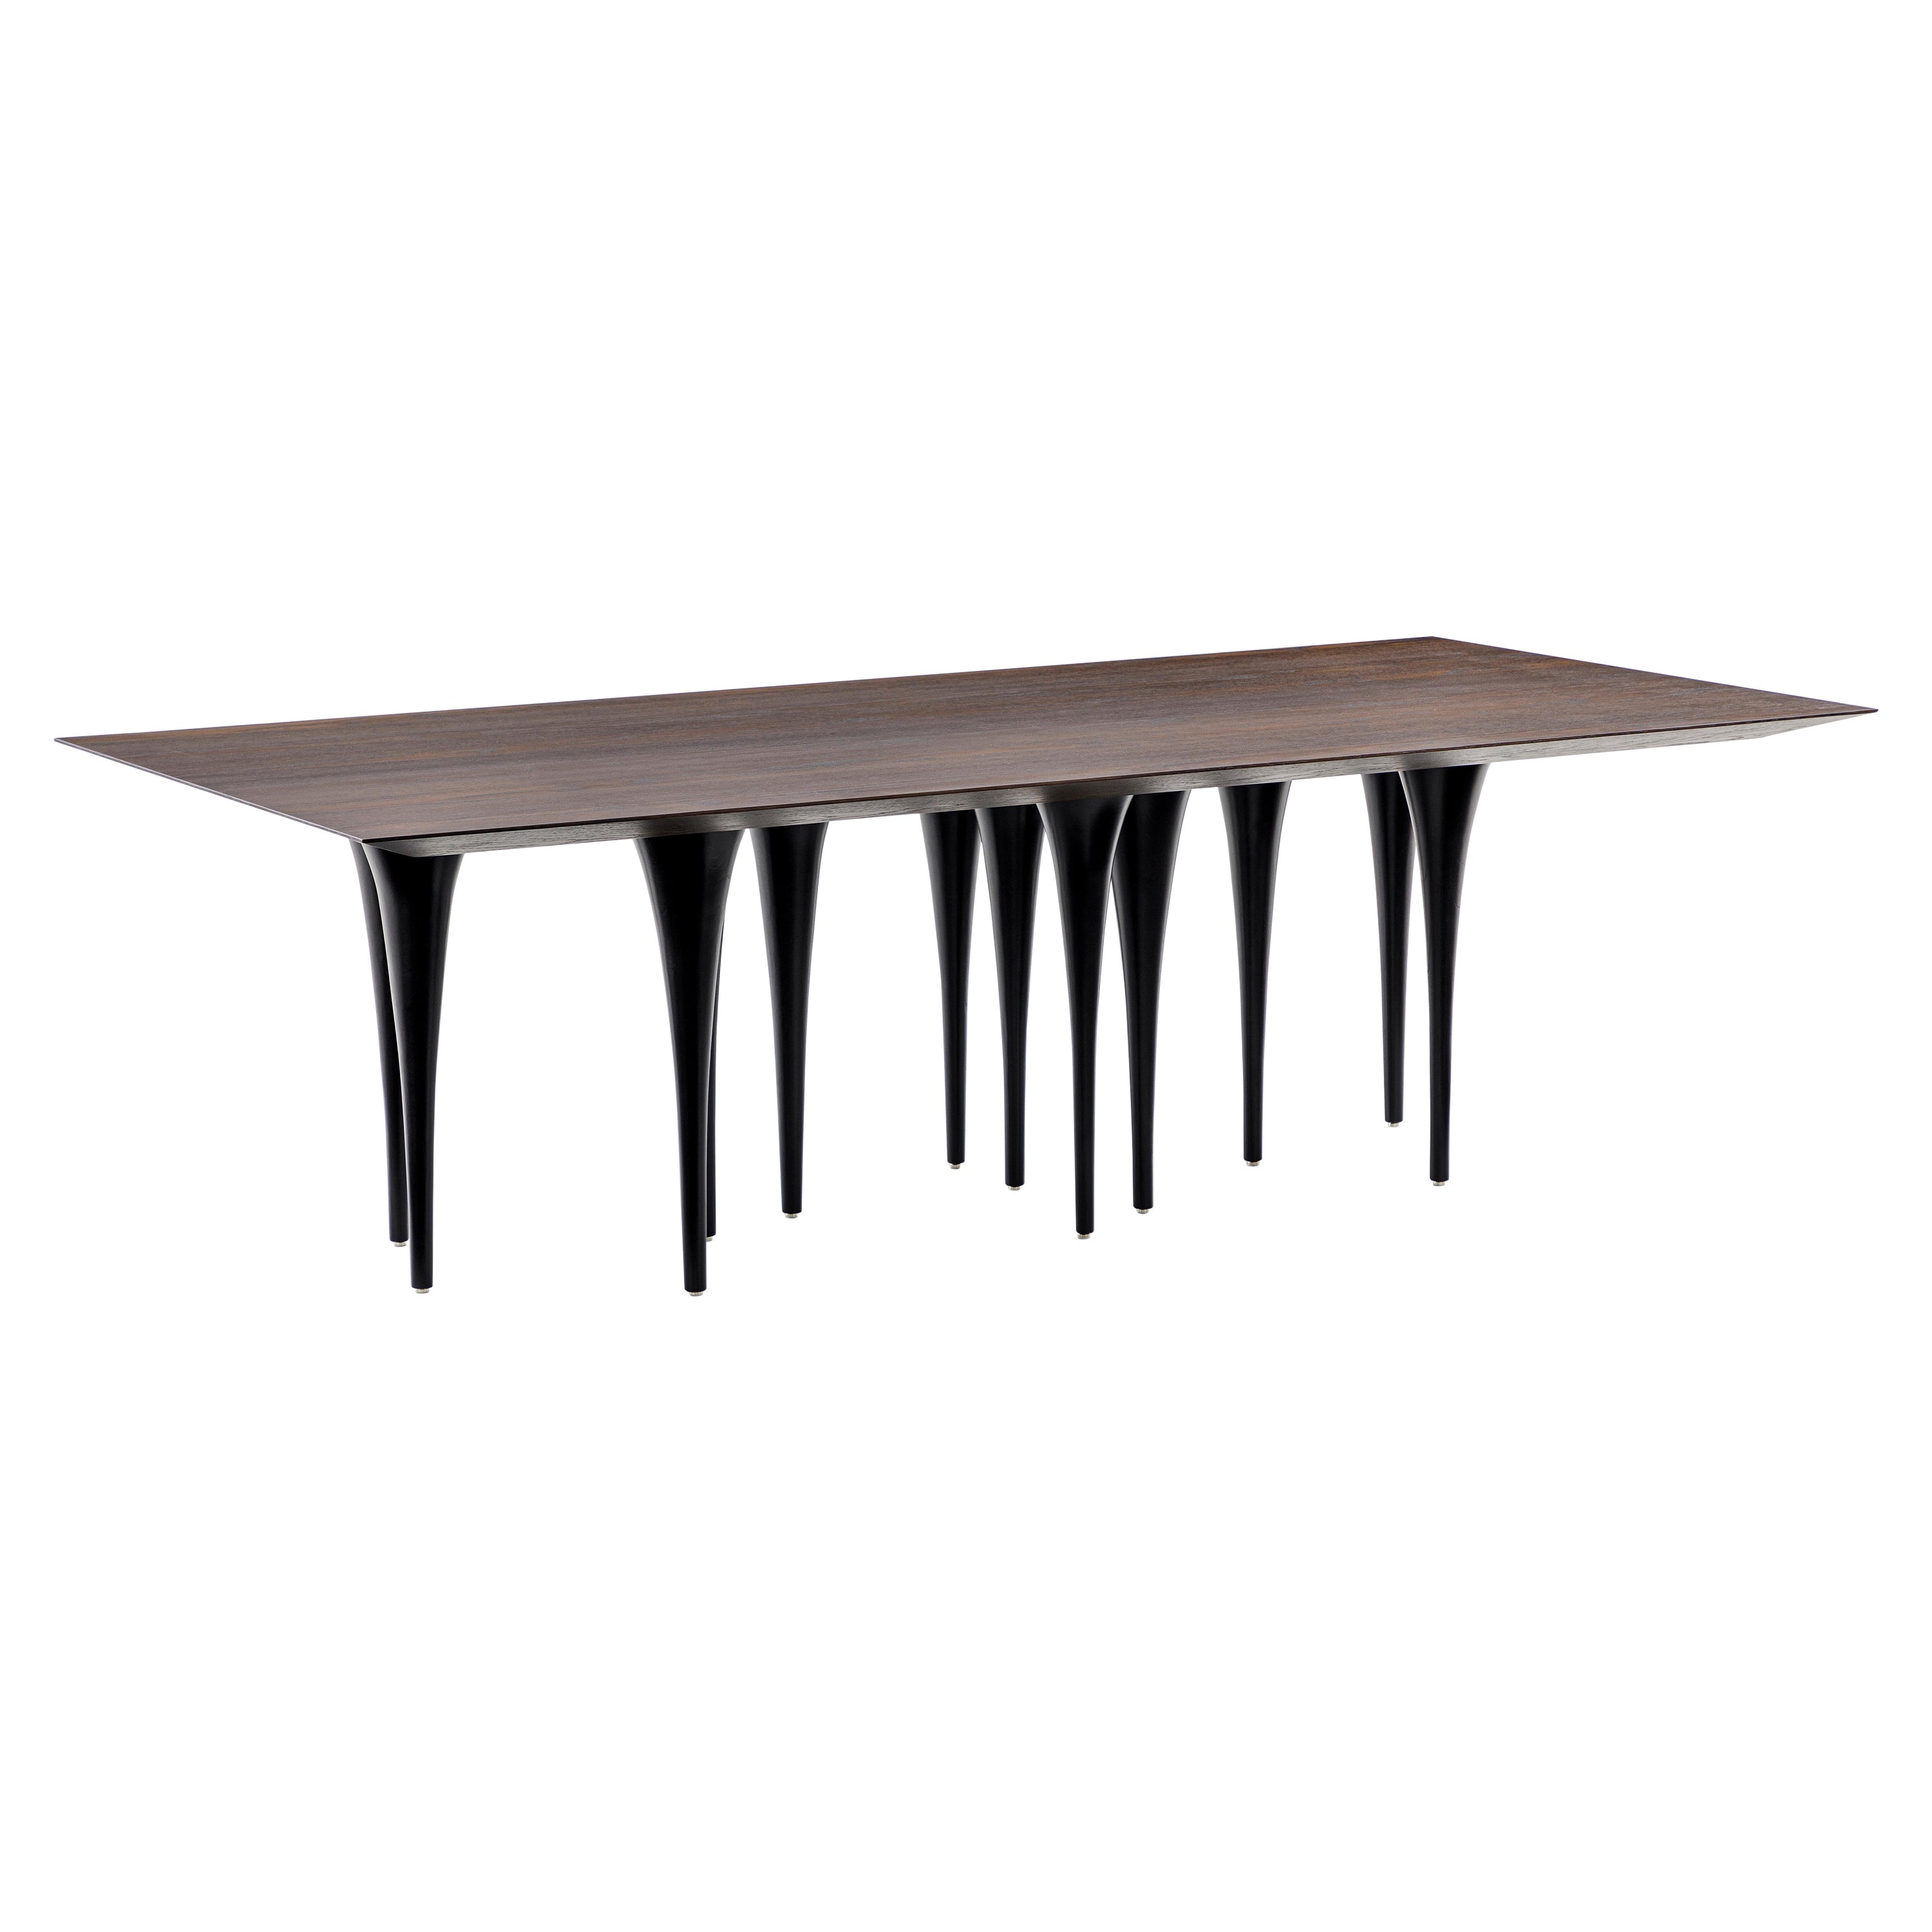 The Uultis team has created this rectangular Pin table in a black oak wood finish top with twelve black legs causing a surprising impact at first sight. It has a very singular and original structure resembling the corridors of gothic castles, but at